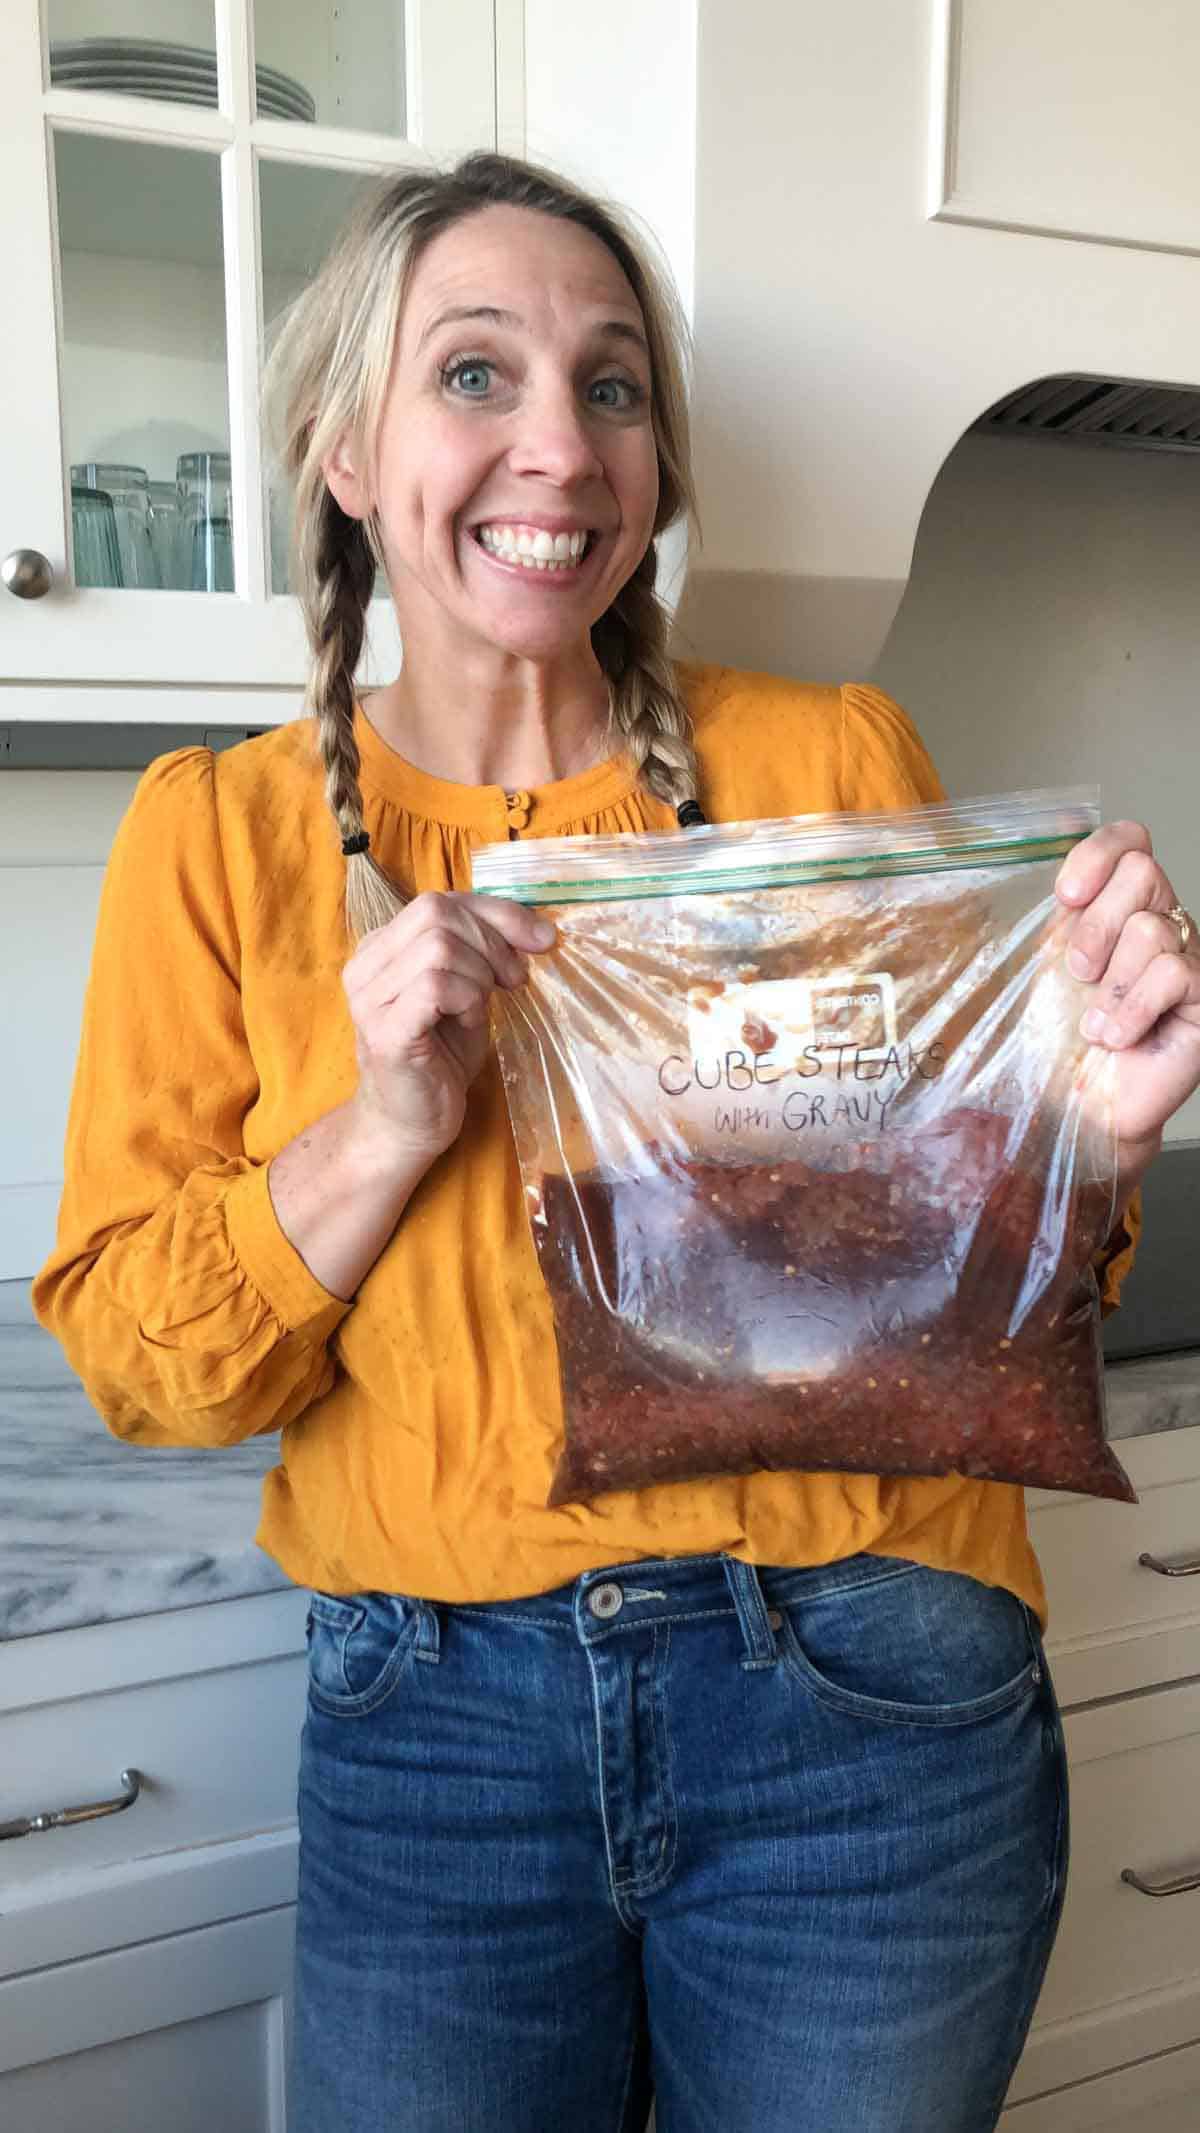 Best list of easy freezer meals: karrie truman holding a bagged freezer meal